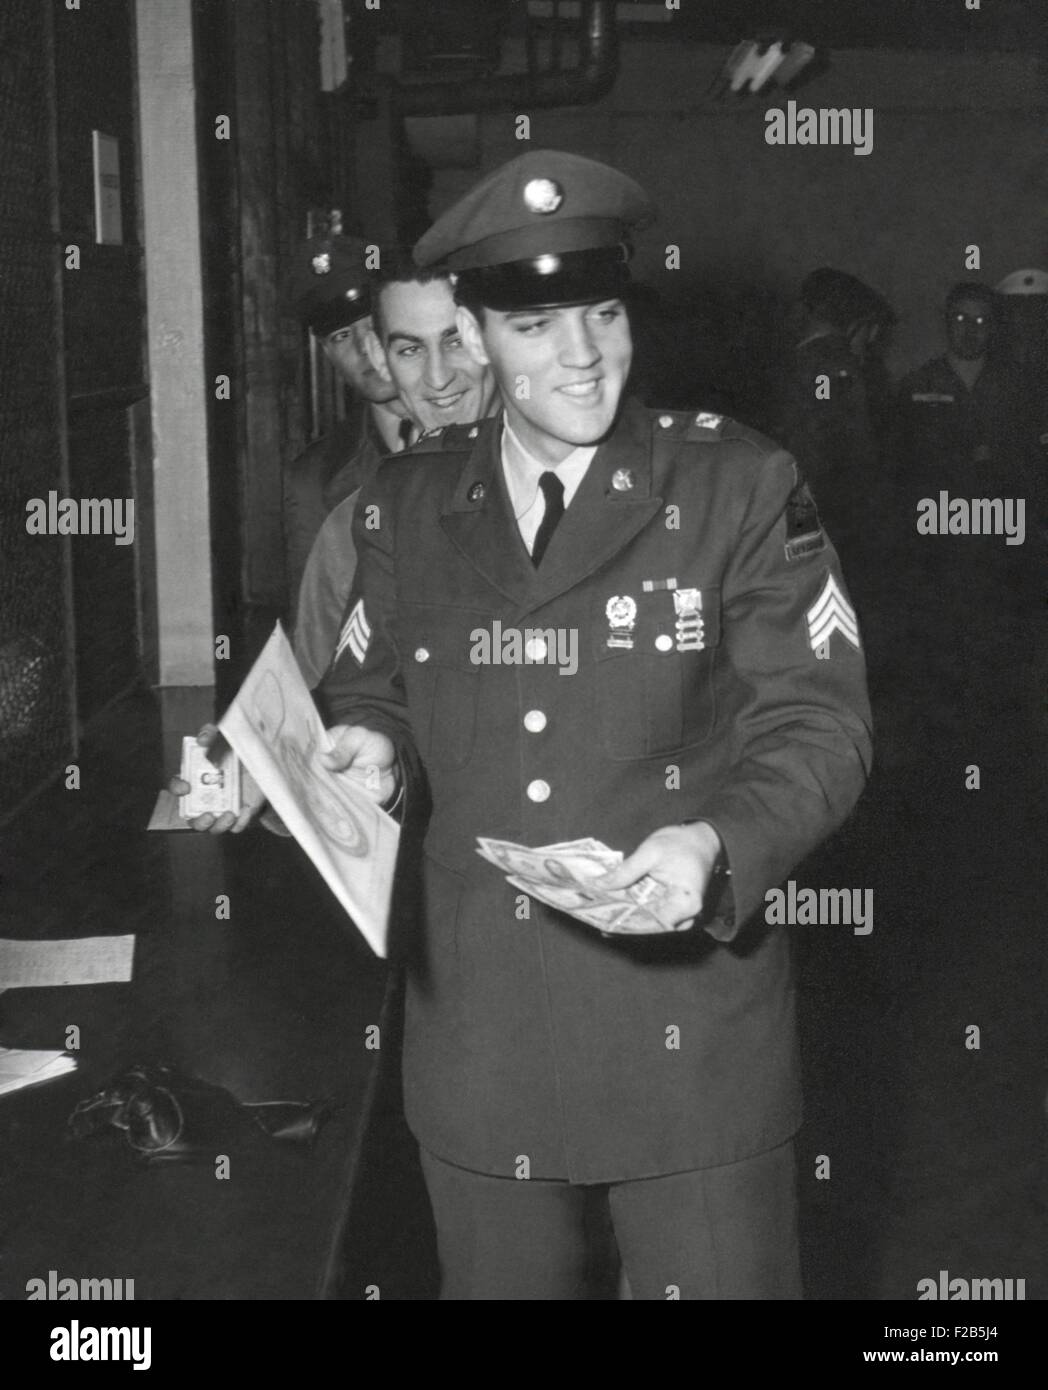 Sgt. Elvis A. Presley, 32nd Armored, 3rd Armored Div. collecting his last pay as he re-enters civilian life. March 5, 1960. - (BSLOC 2014 17 108) Stock Photo